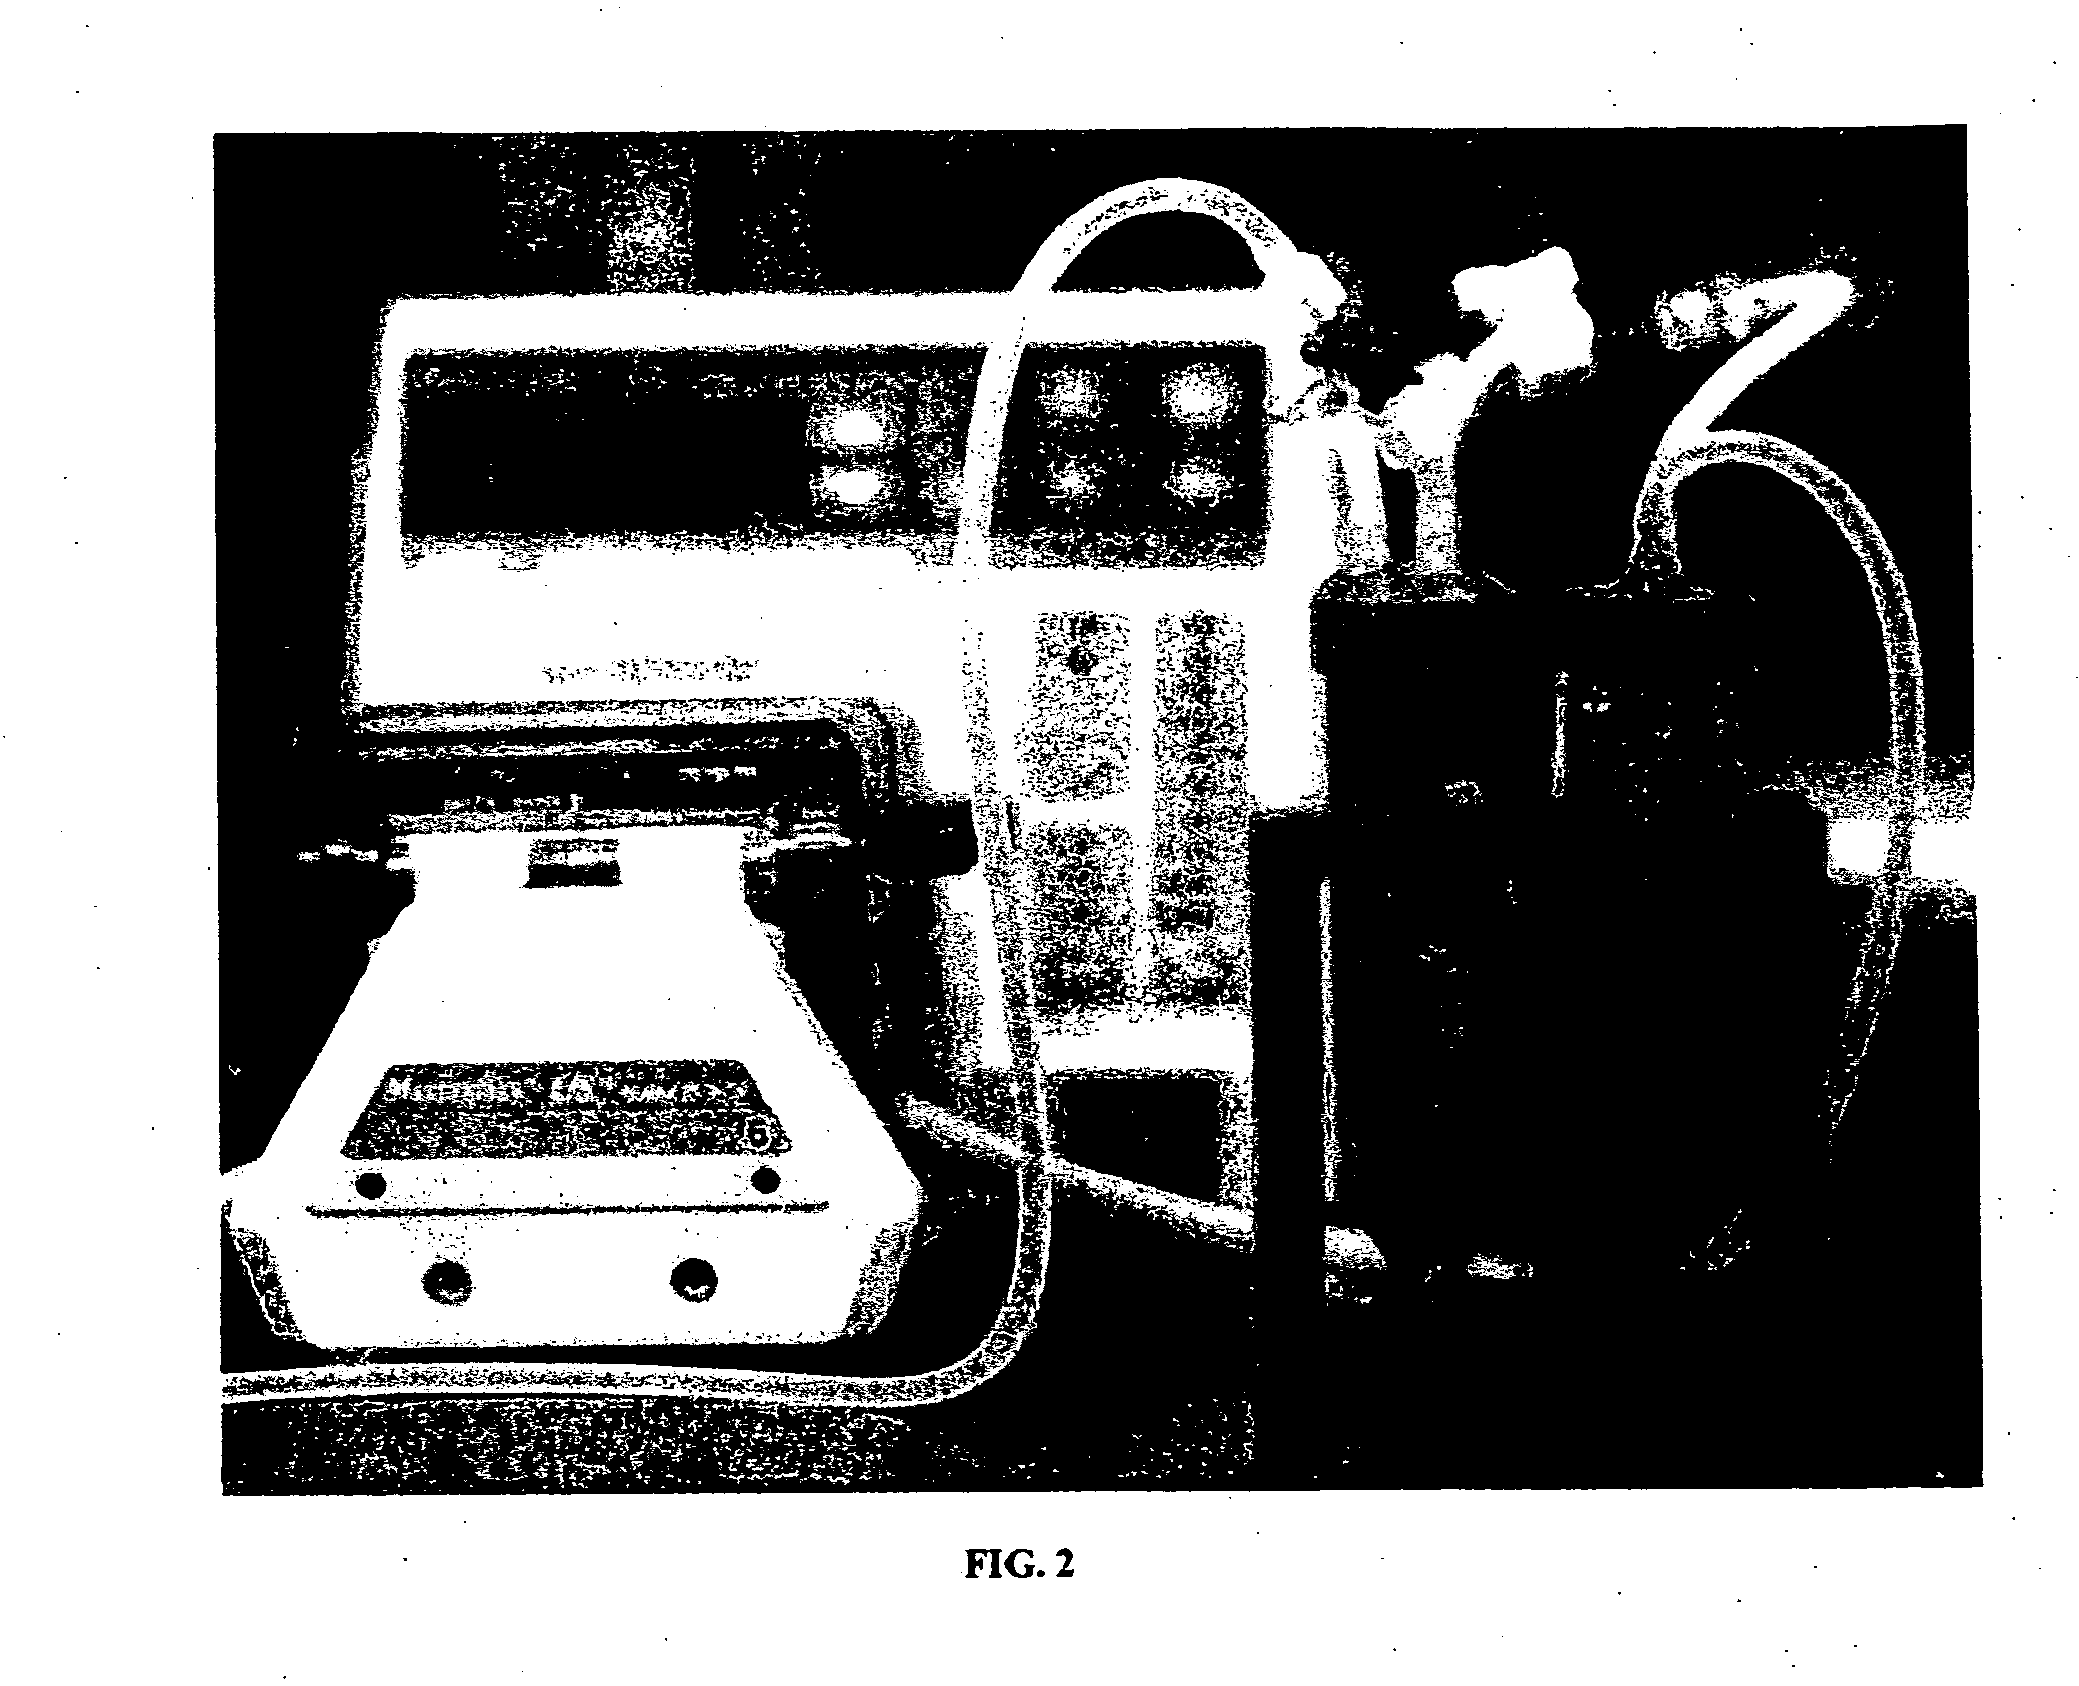 Vascular mimic for drug and device evaluation